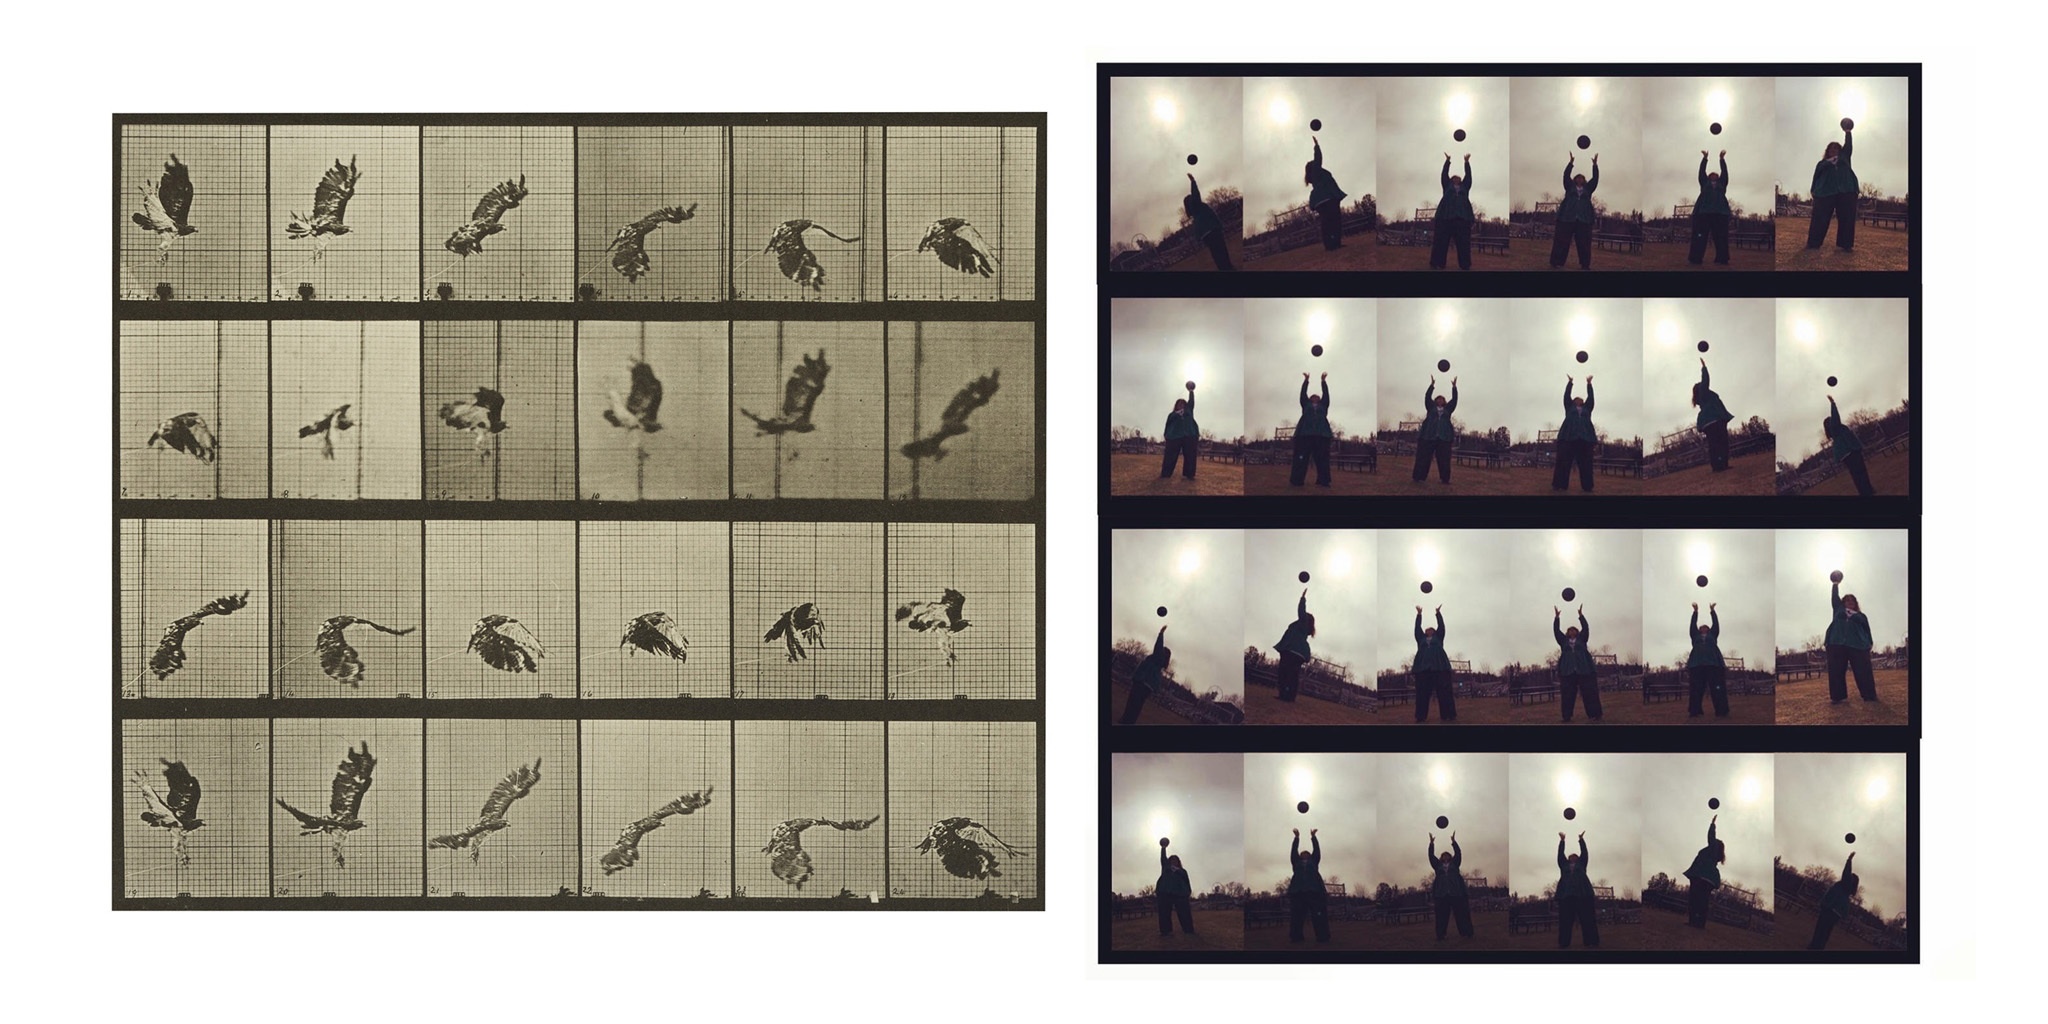 [Eadweard Muybridge's _Animal Locomotion, Plate 763 (Red-tailed hawk; flying)_, 1887, collotype (photomechanical print), The Jack Shear Collection of Photography at the Tang Teaching Museum, 2015.1.32](https://tang.skidmore.edu/collection/artworks/2029-animal-locomotion-plate-763-red-tailed-hawk-flying) re-created by Friend of the Tang Patricia Cornute